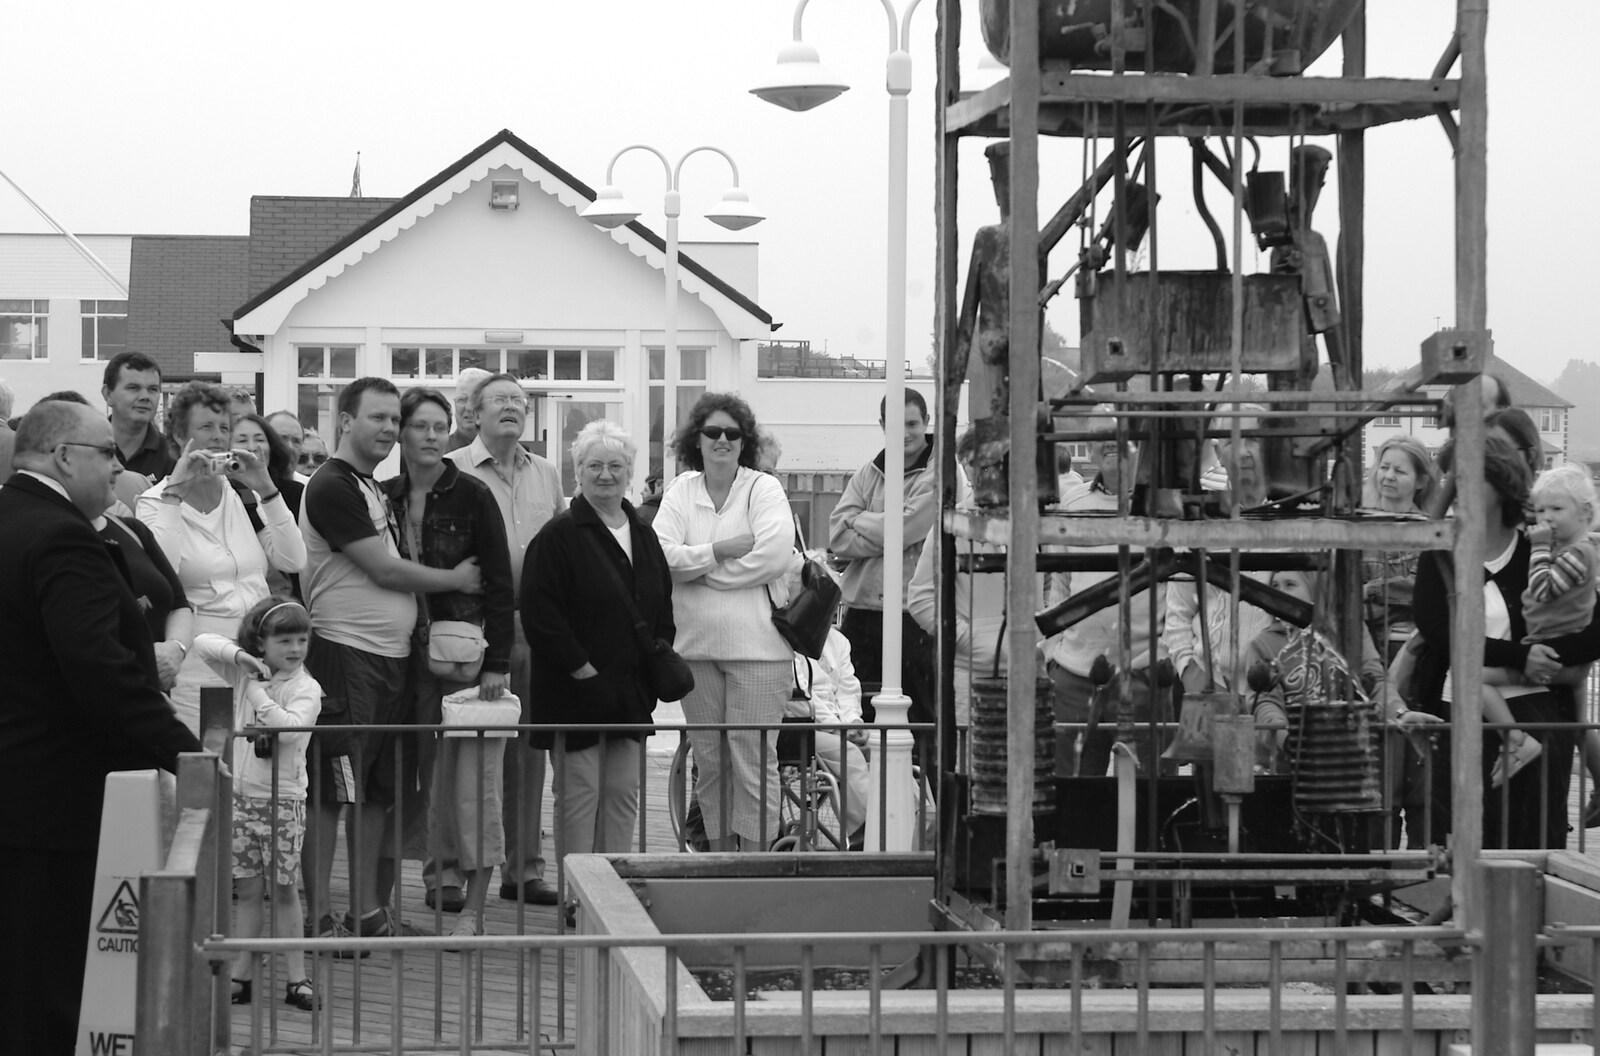 Crowds watch Tim Hunkins' clock from Sally and Paul's Wedding on the Pier, Southwold, Suffolk - 3rd September 2005